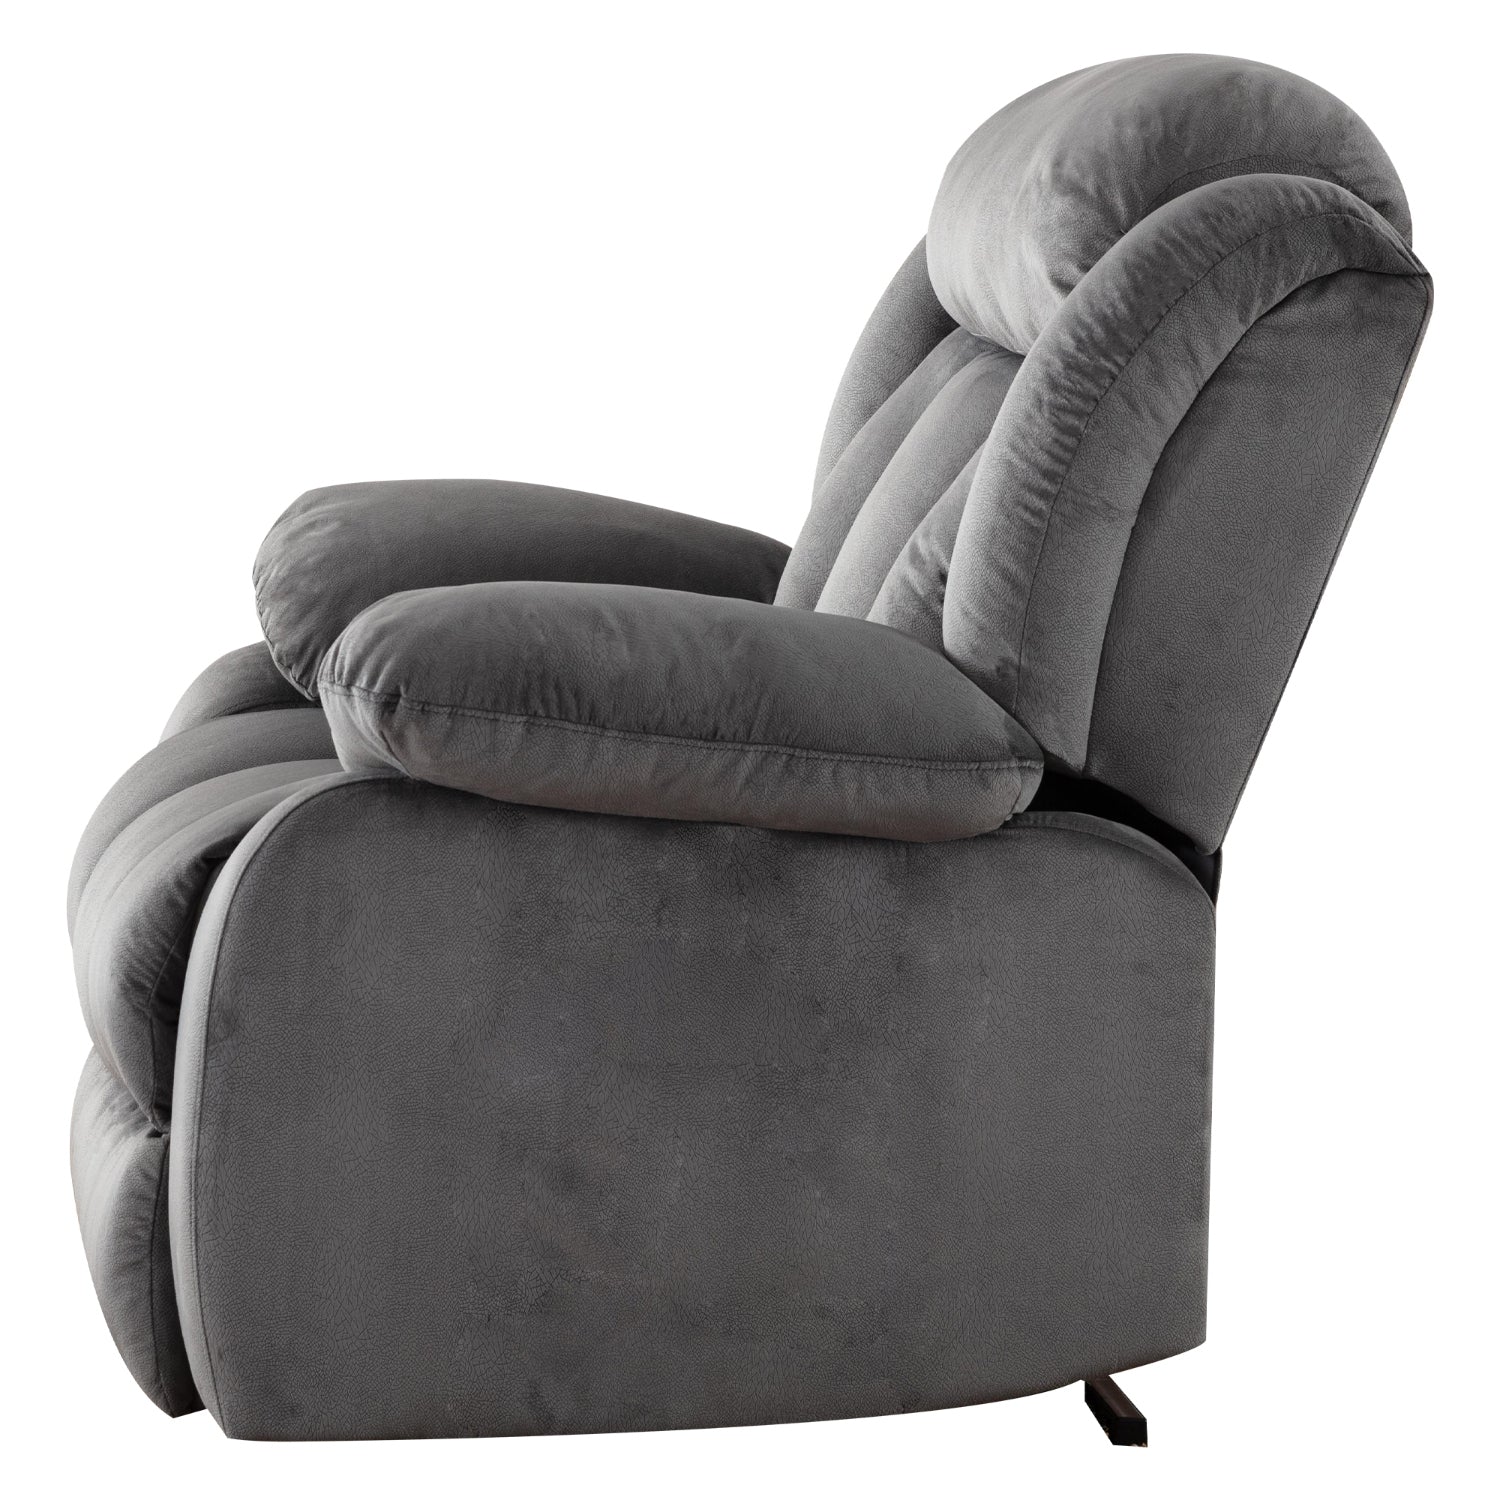 Carter Gray Oversized Power Lift Recliner With Vibration Massage and Heat